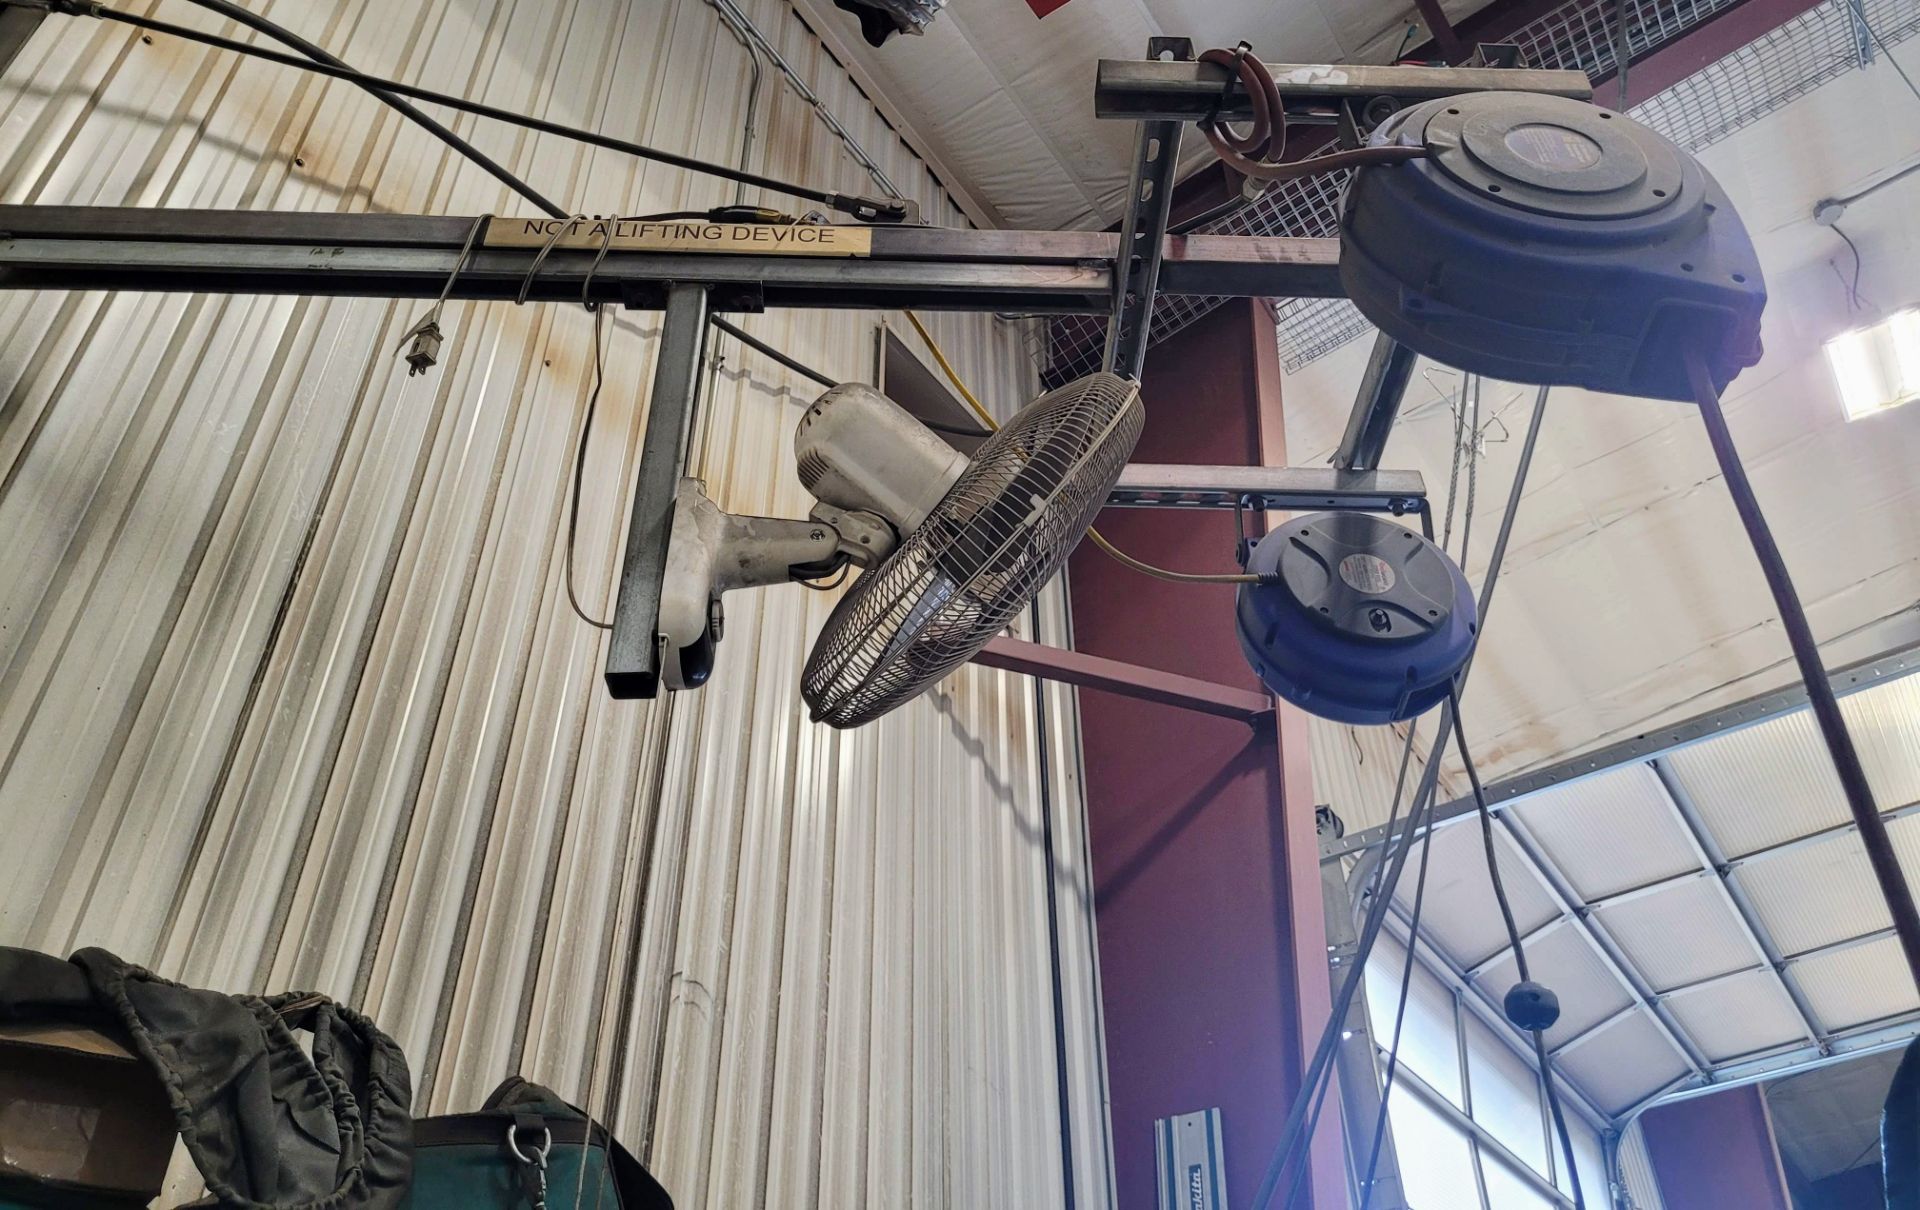 APPROX. 12'H X 6' ARM FREE STANDINGIN JIB W/ (2) RETRACTABLE AIR REELS, FAN, QUICK CONNECT AIR - Image 3 of 3